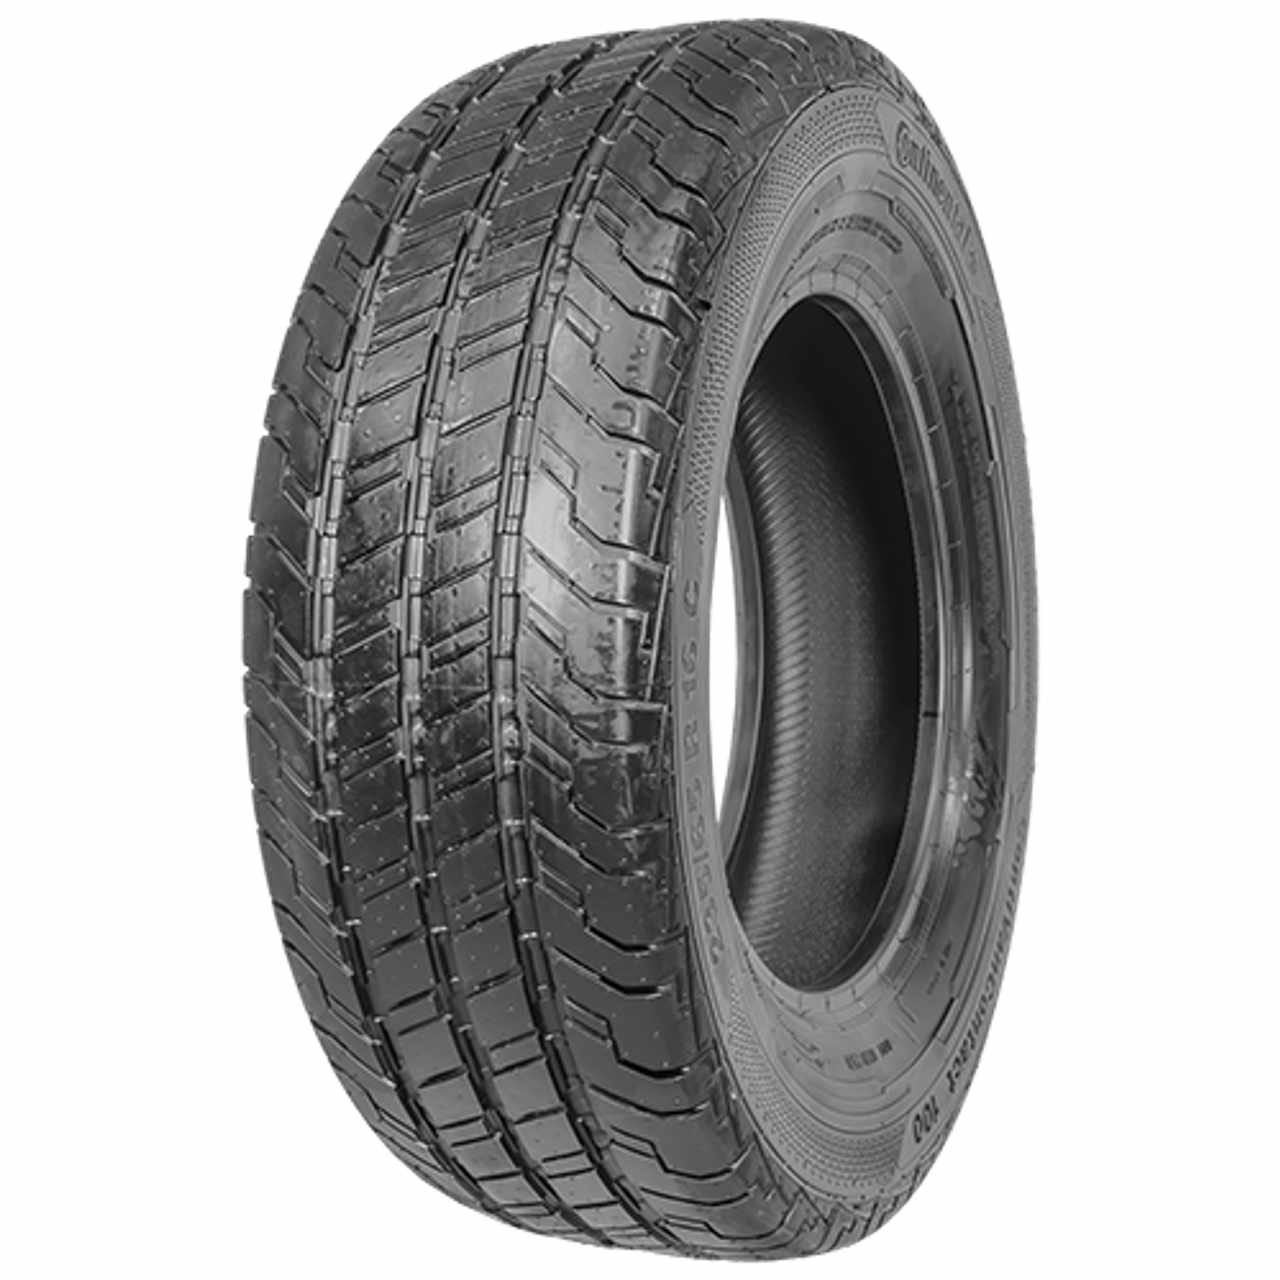 CONTINENTAL CONTIVANCONTACT 100 185/75R14C 102R BSW